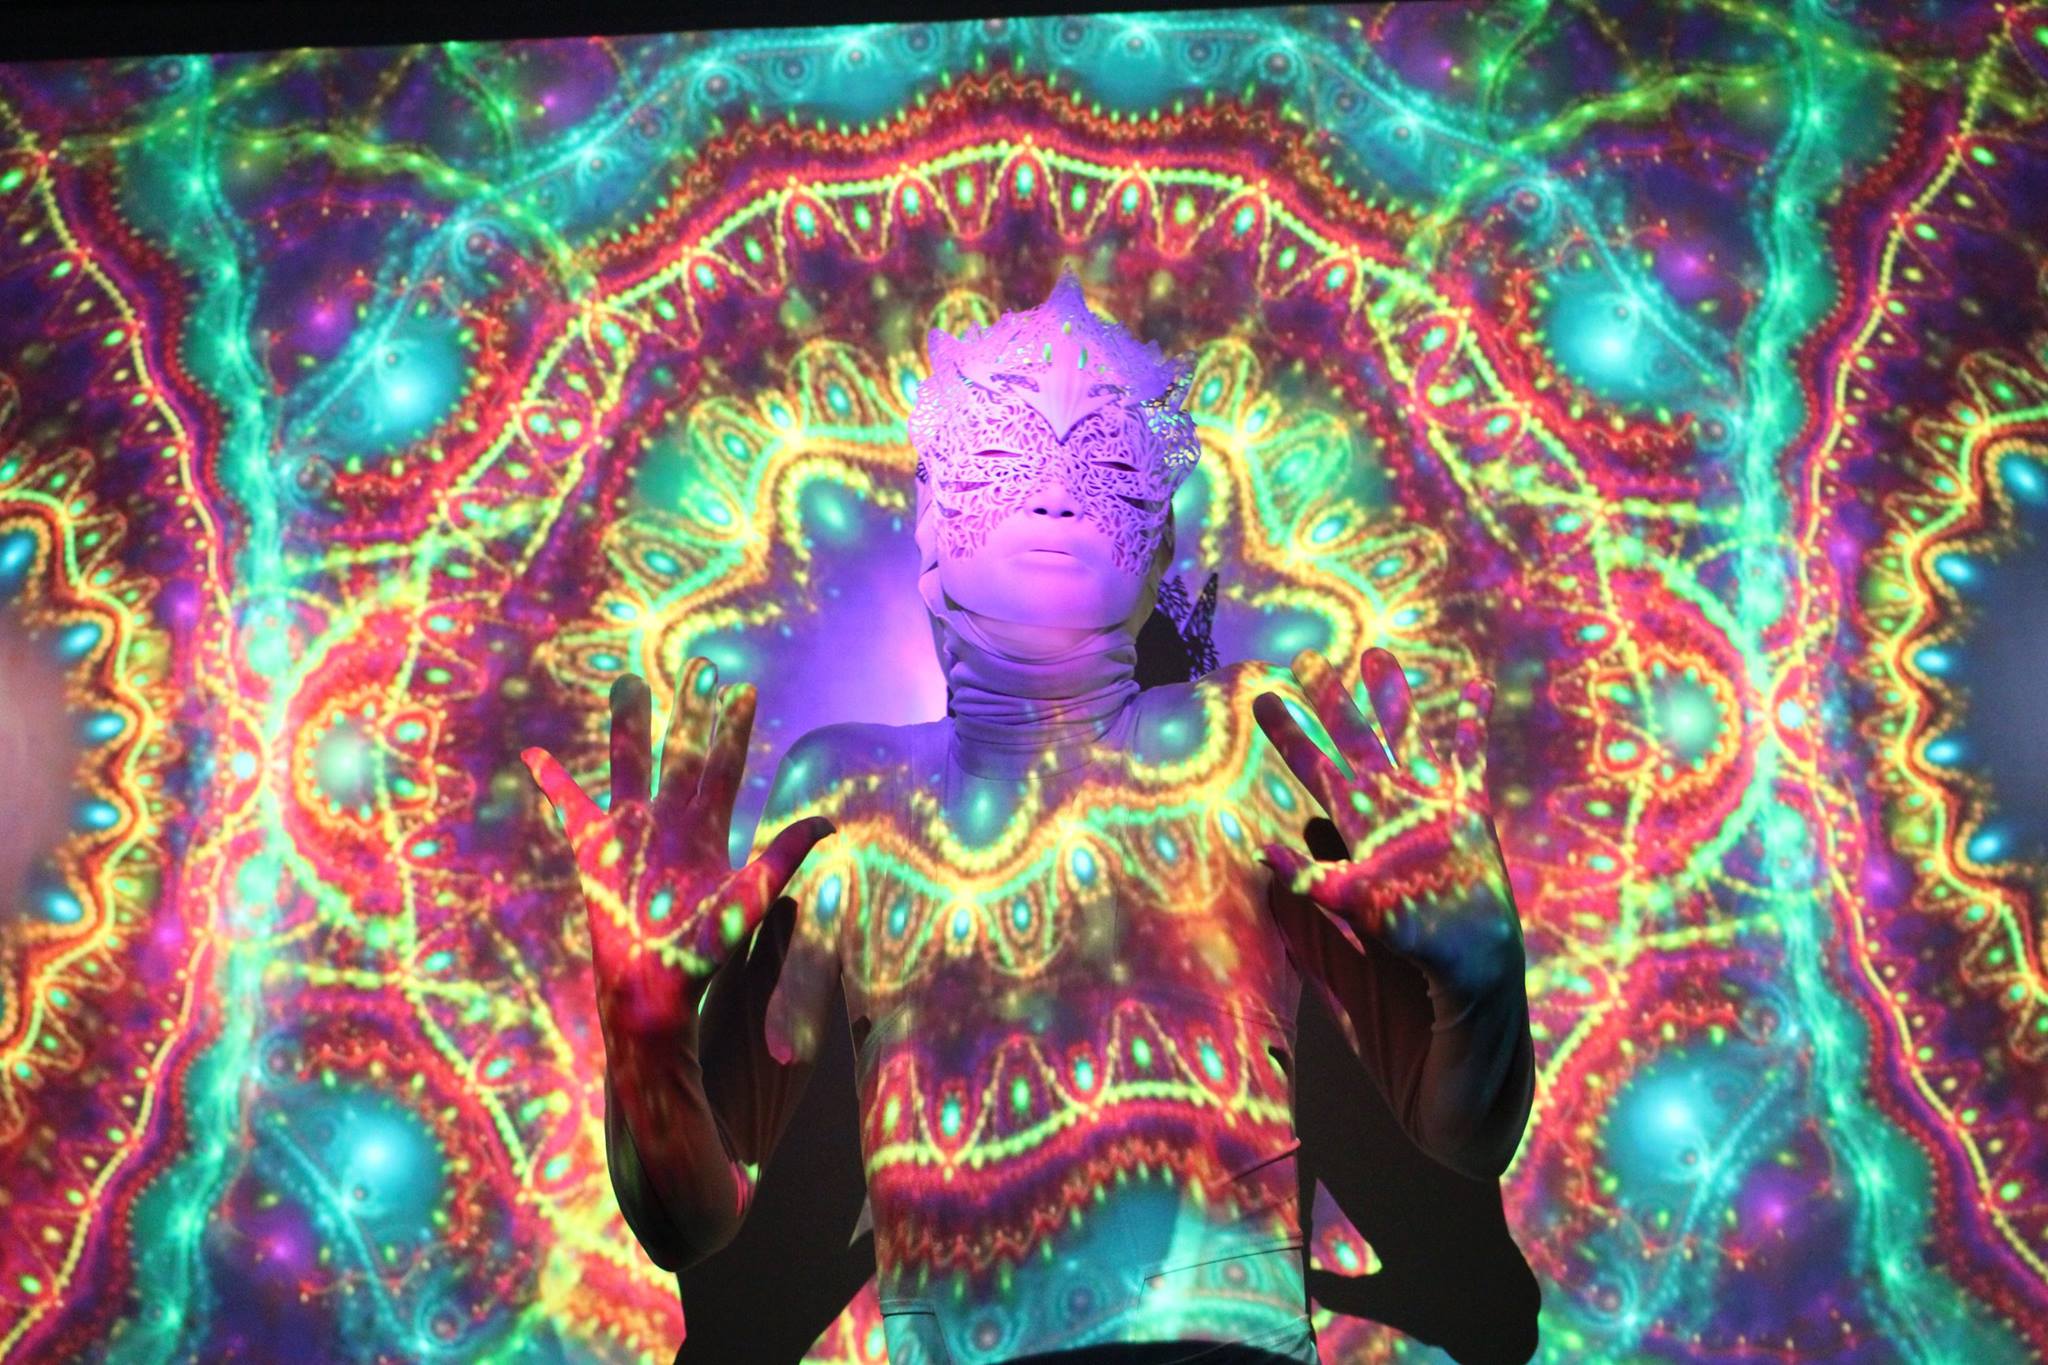 A person wearing an ornate mask standing with hands up as a bright and colourful design is projected onto them.